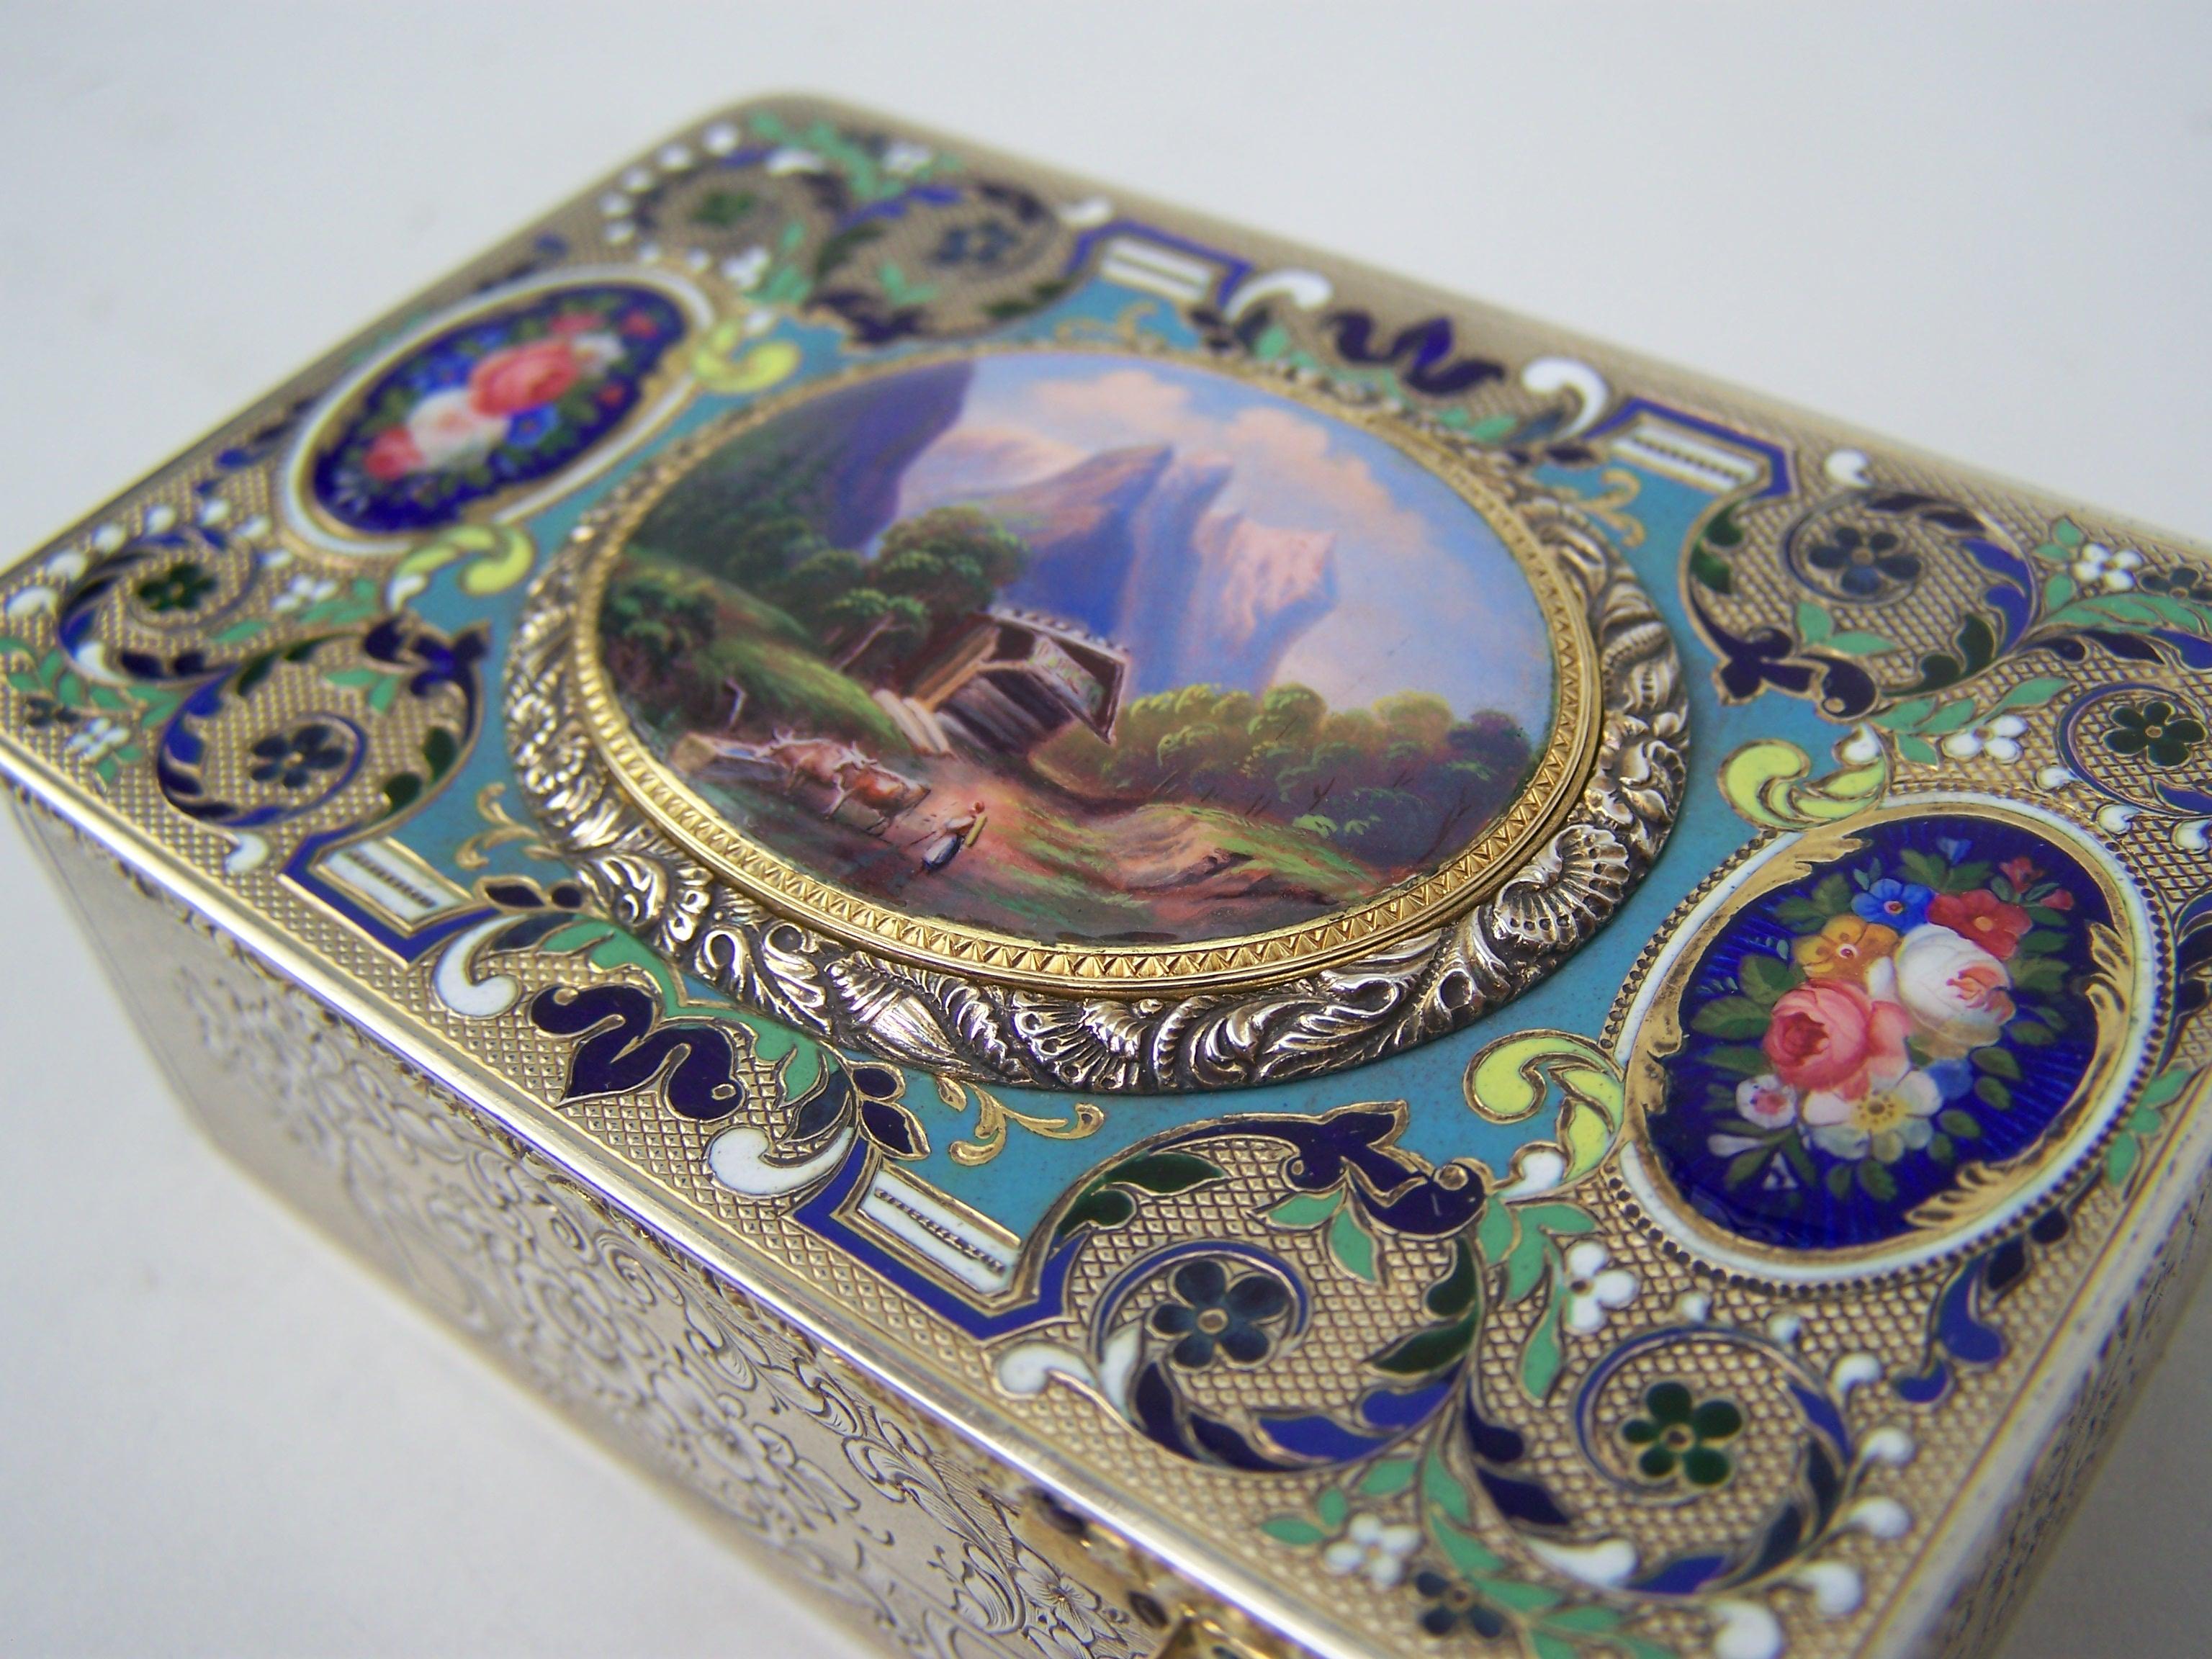 Engraved Singing bird box by Bruguier in silver case with enamel to top and lid For Sale